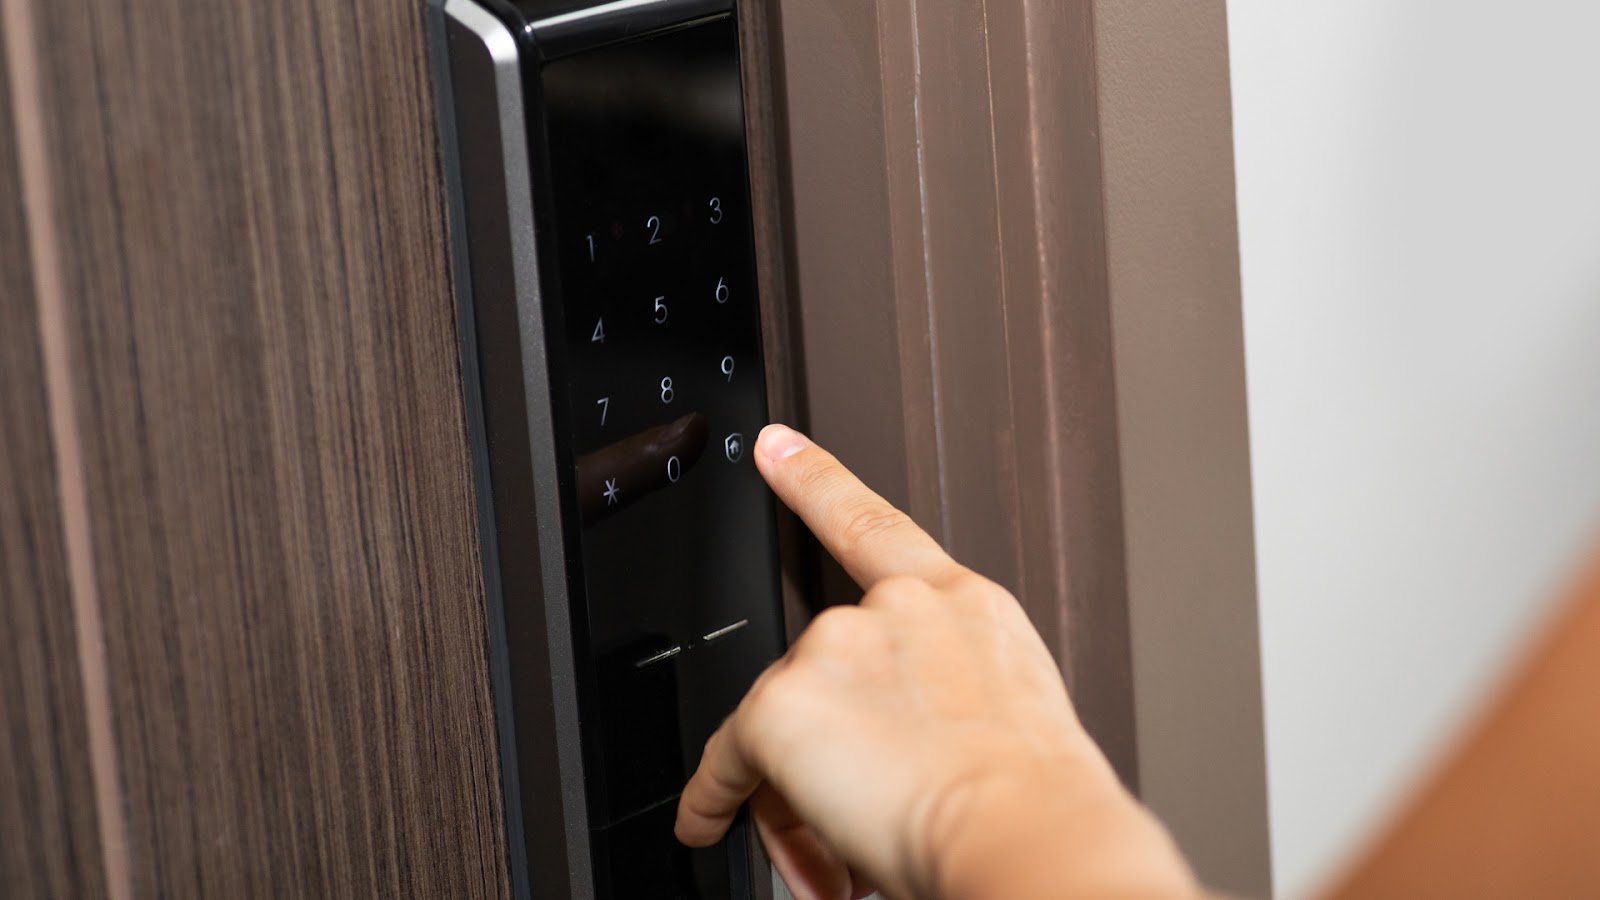 For rust-free experience, consider quality smart locks for your front door locks.